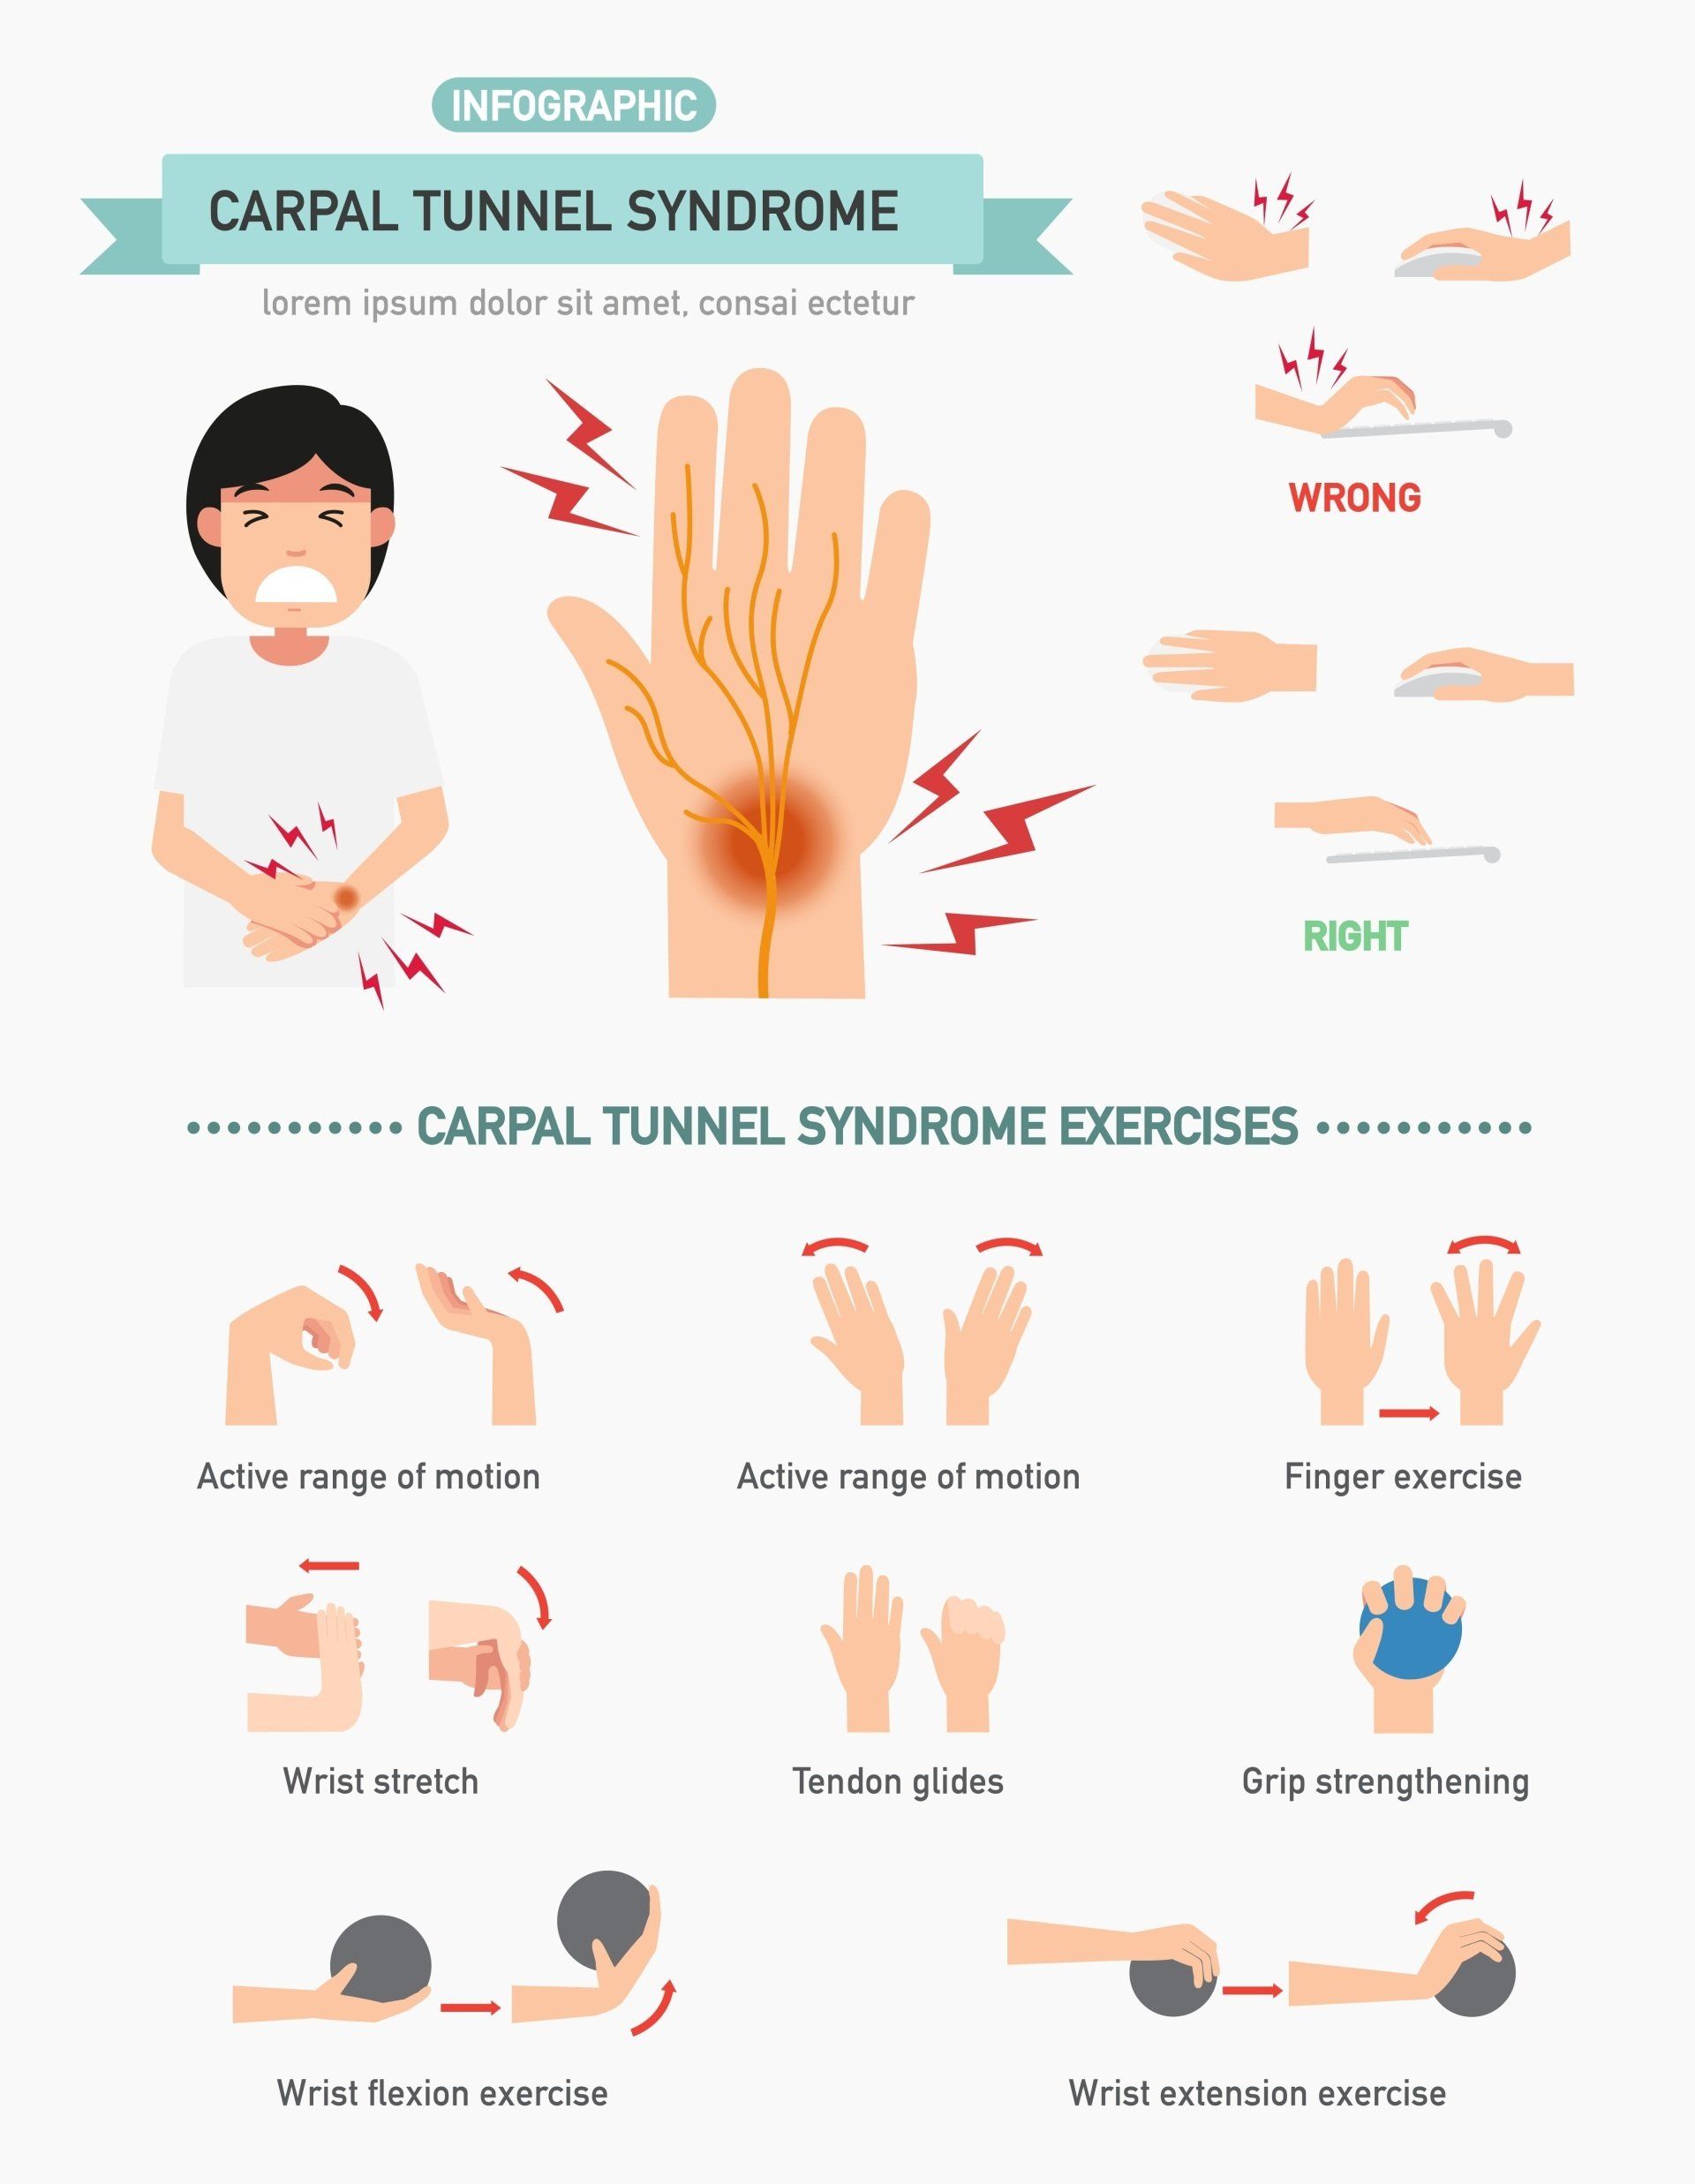 Carpal tunnel syndrome exercises